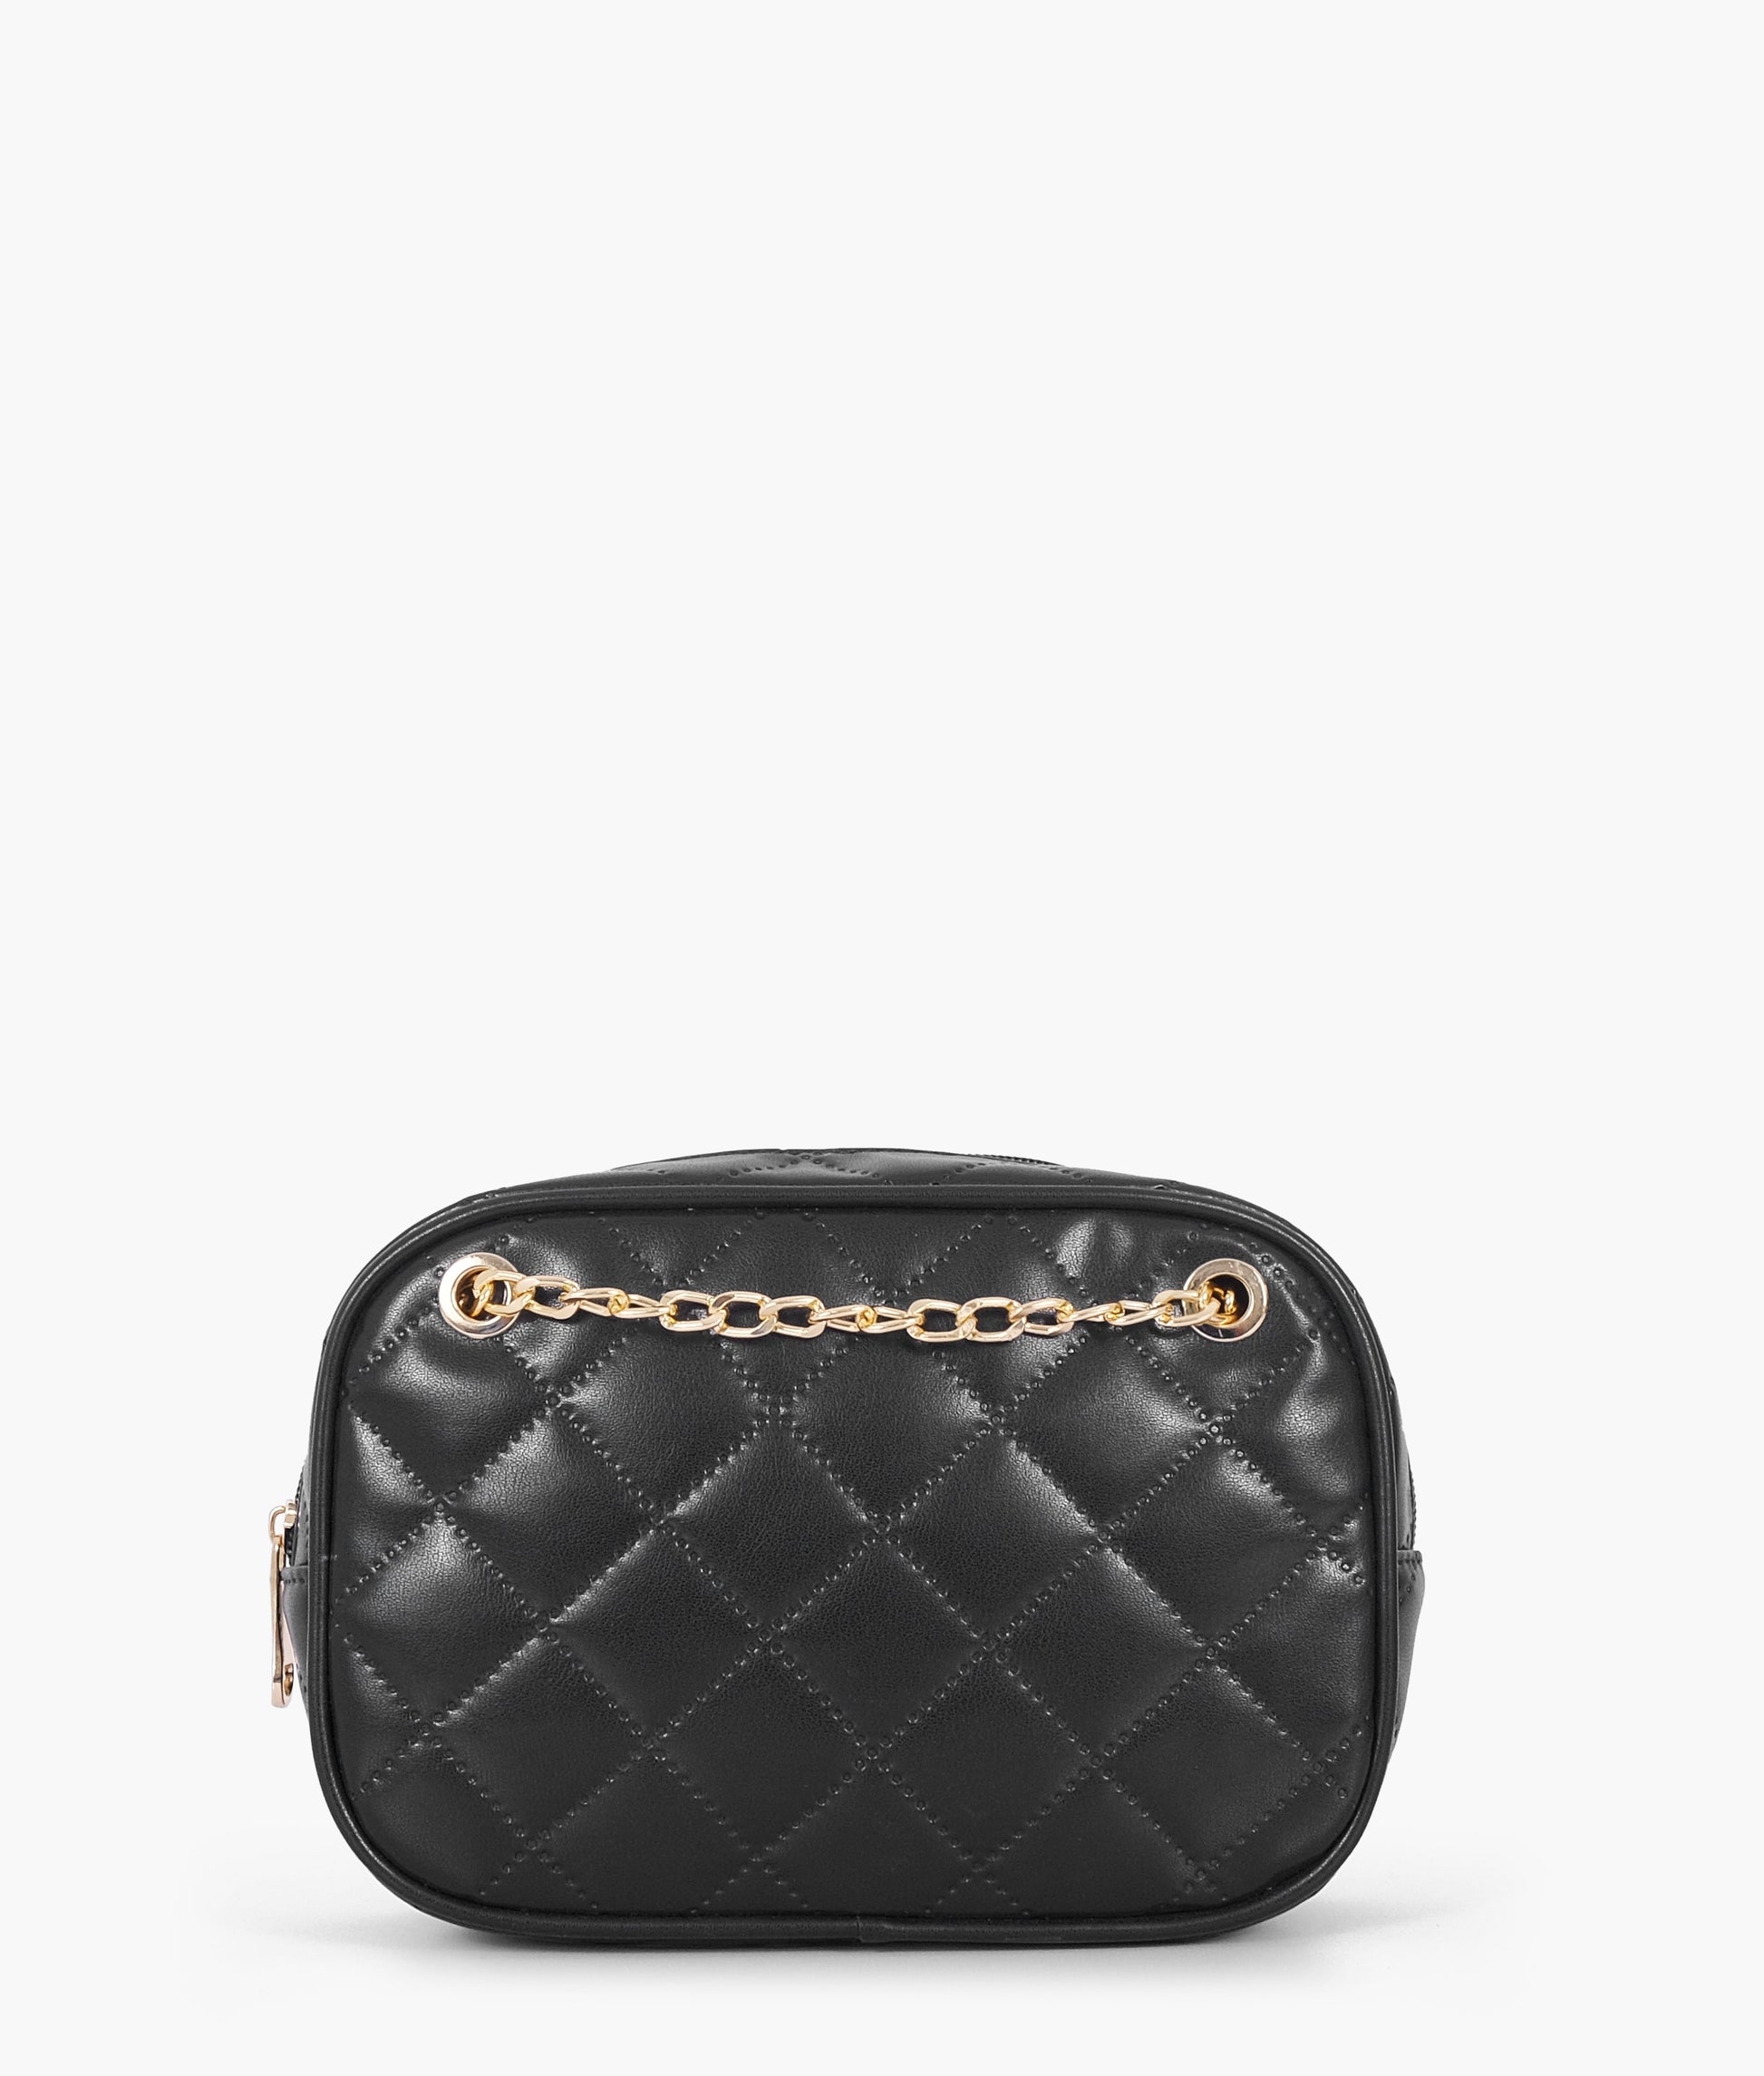 Buy Black Quilted Rectangle Cross Body Bag - Black in Pakistan